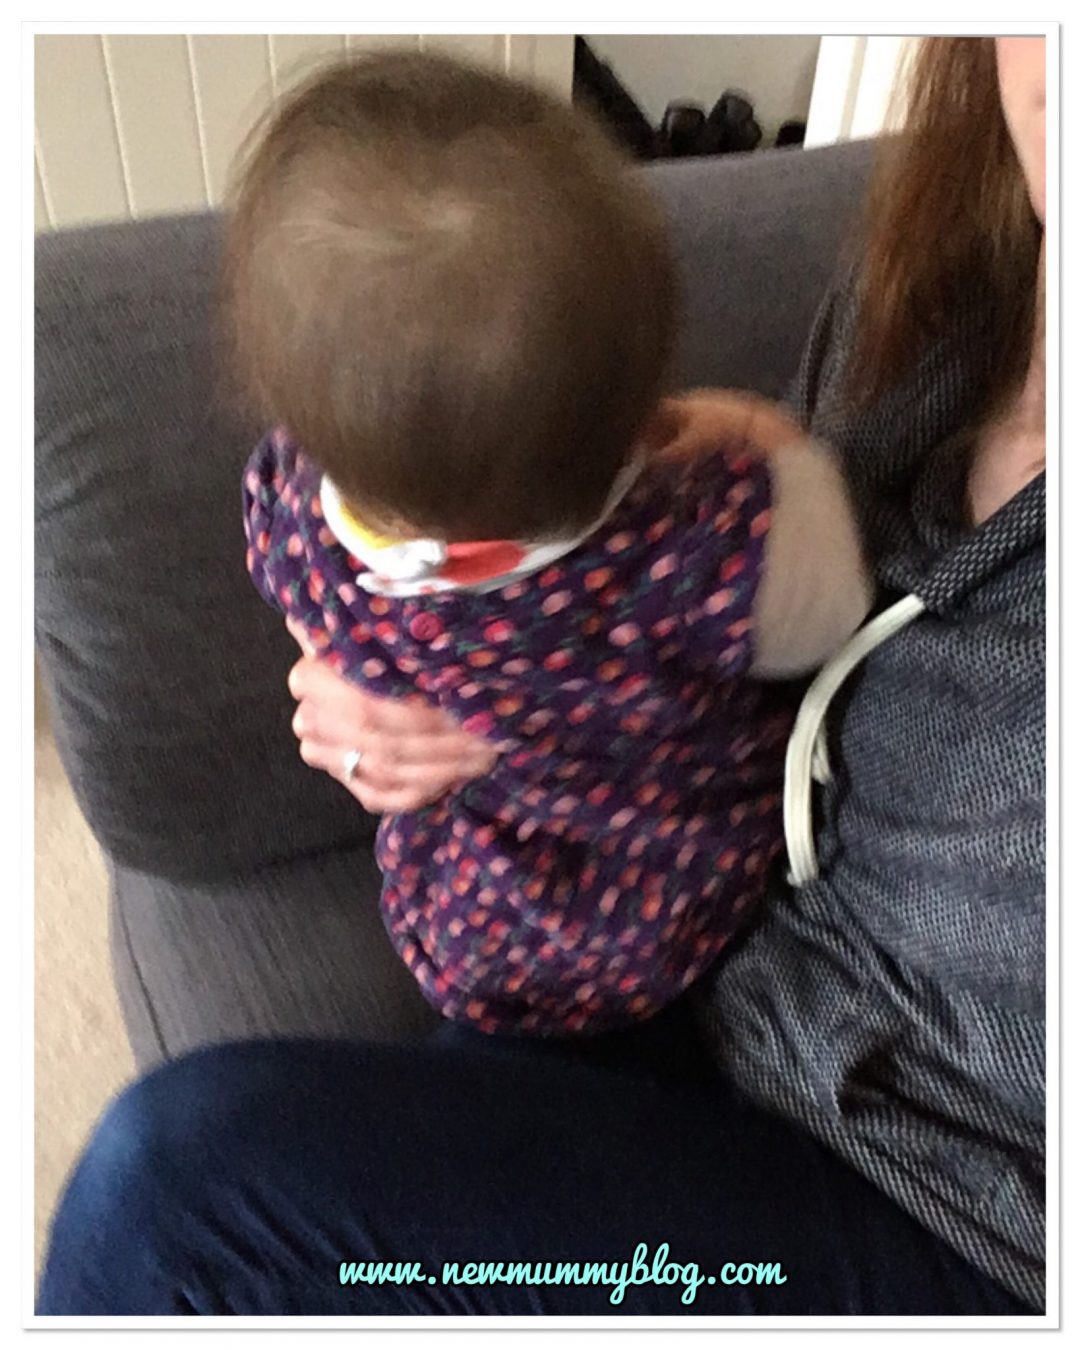 Baby distracted by a noise during breastfeeding. Sittingbolt upright. The challenge of feeding a 9 month old who sits, crawls and wants to be involved! 